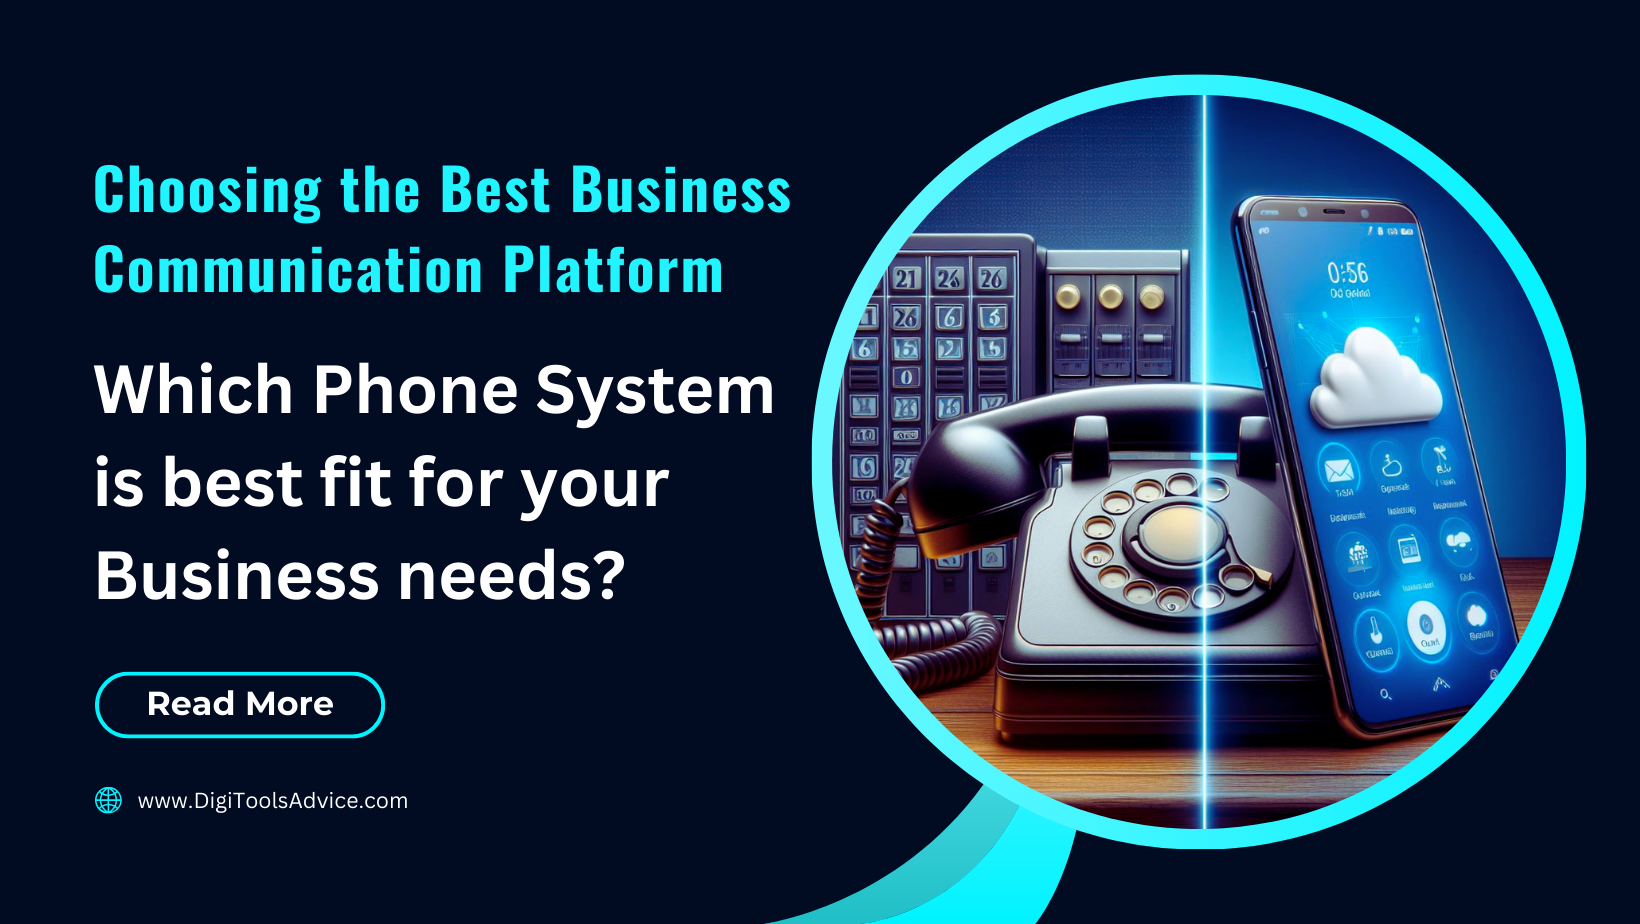 Choosing the Best Business Communication Platform: Which Phone System is best fit for your Business needs?